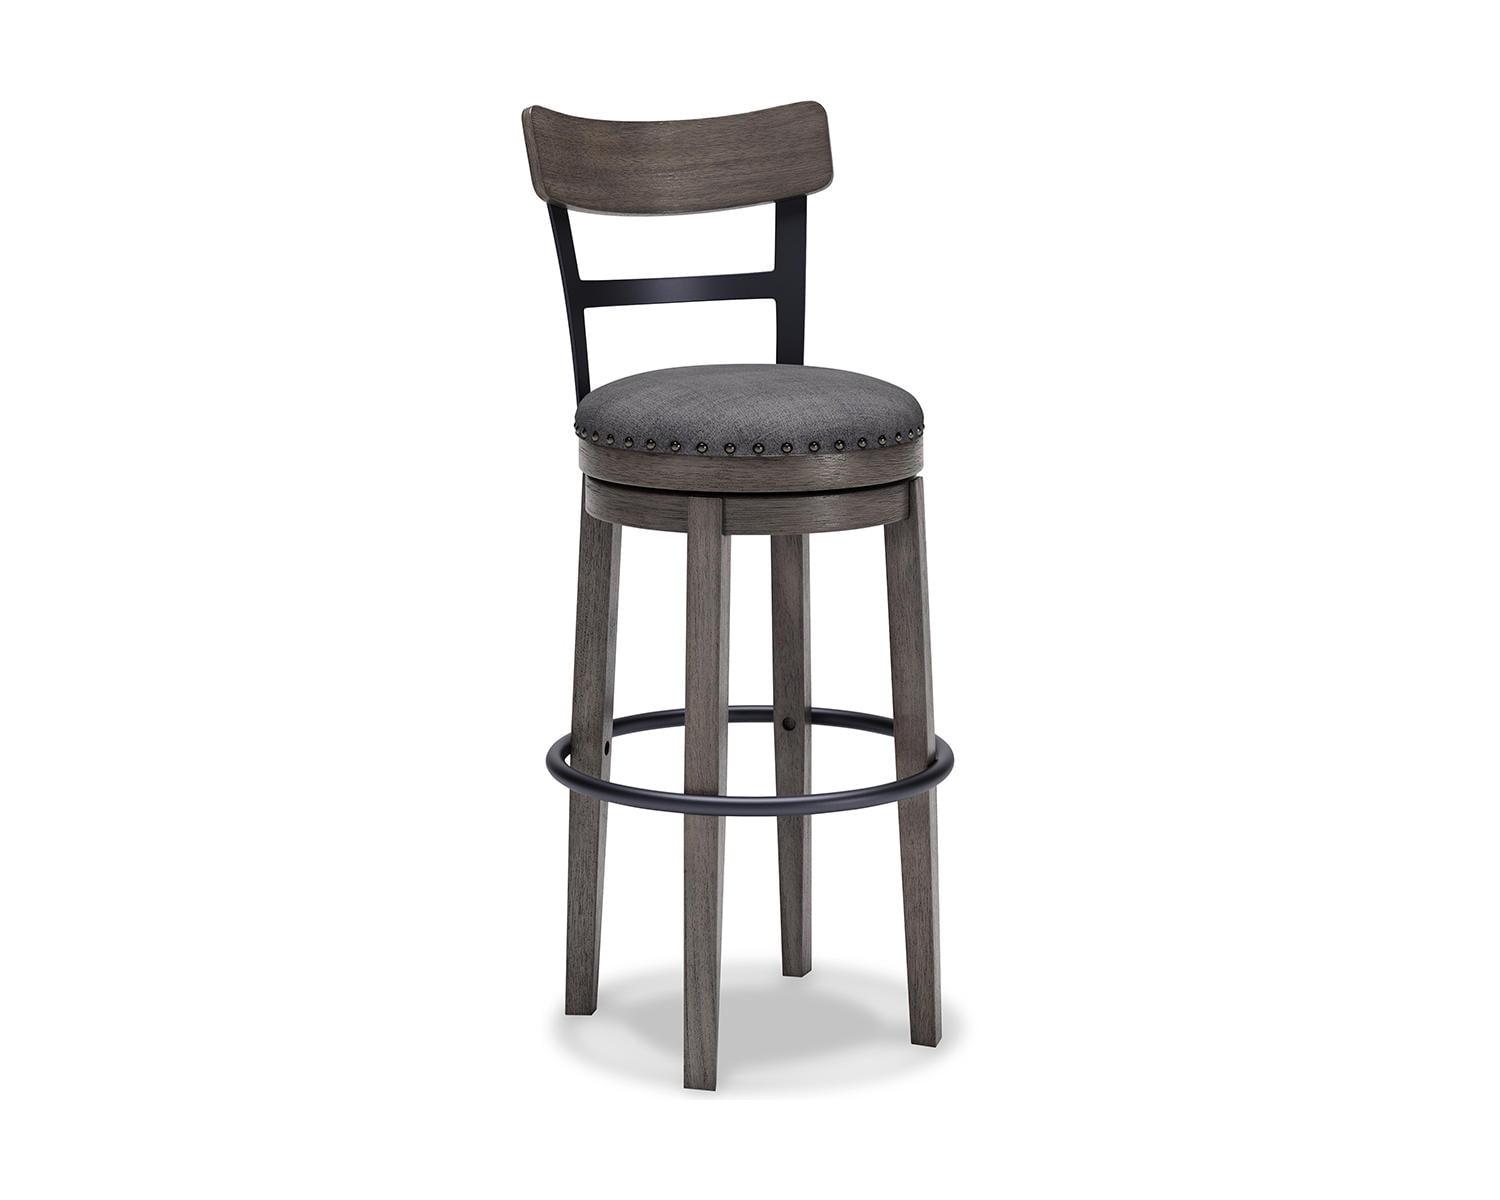 Antiqued Gray Wash Swivel Barstool with Cushioned Seat and Nailhead Trim